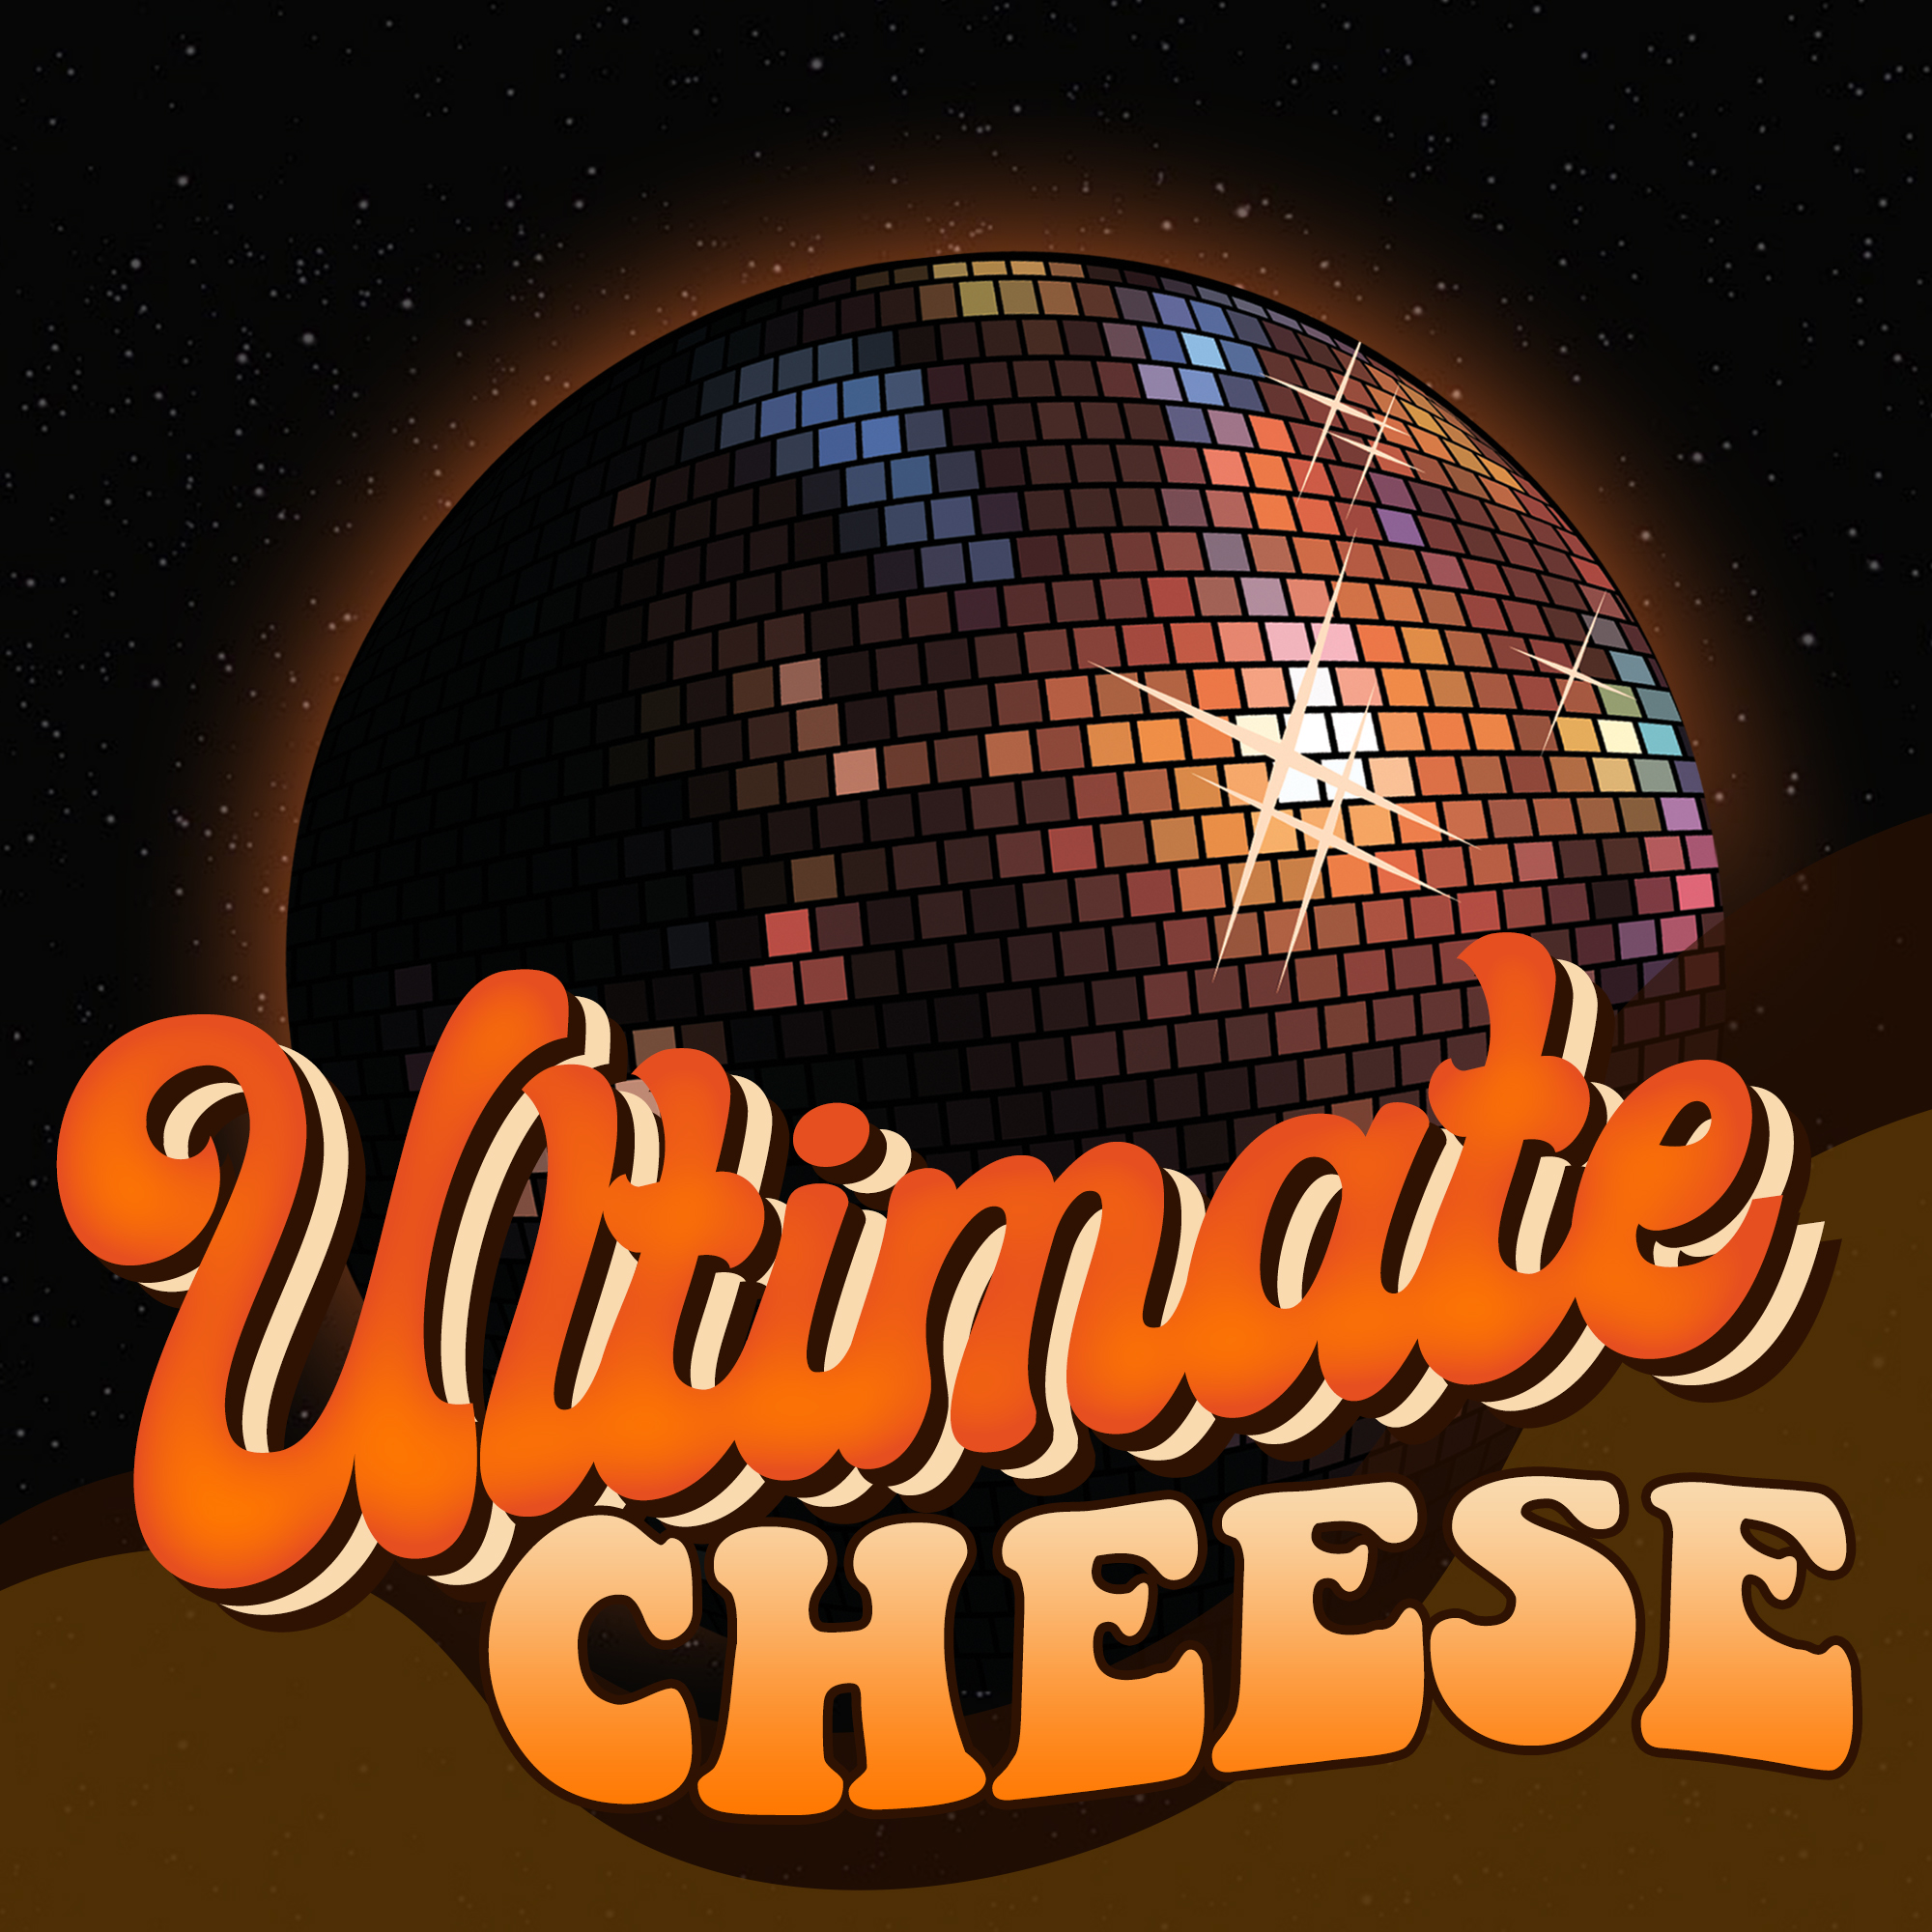 Ultimate Cheese Ultimate Cheese (F)